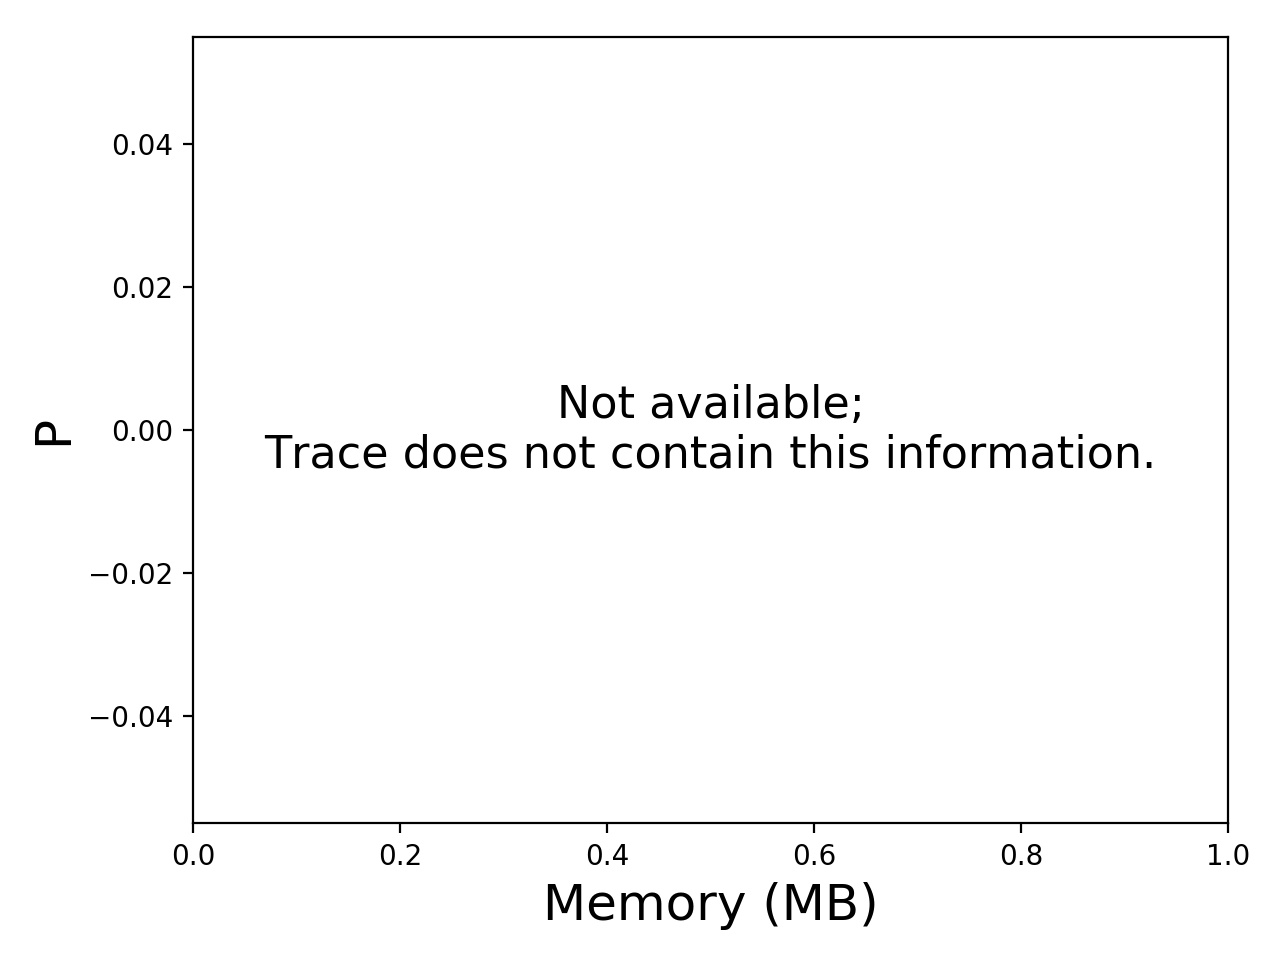 Task memory consumption graph for the LANL_Trinity trace.